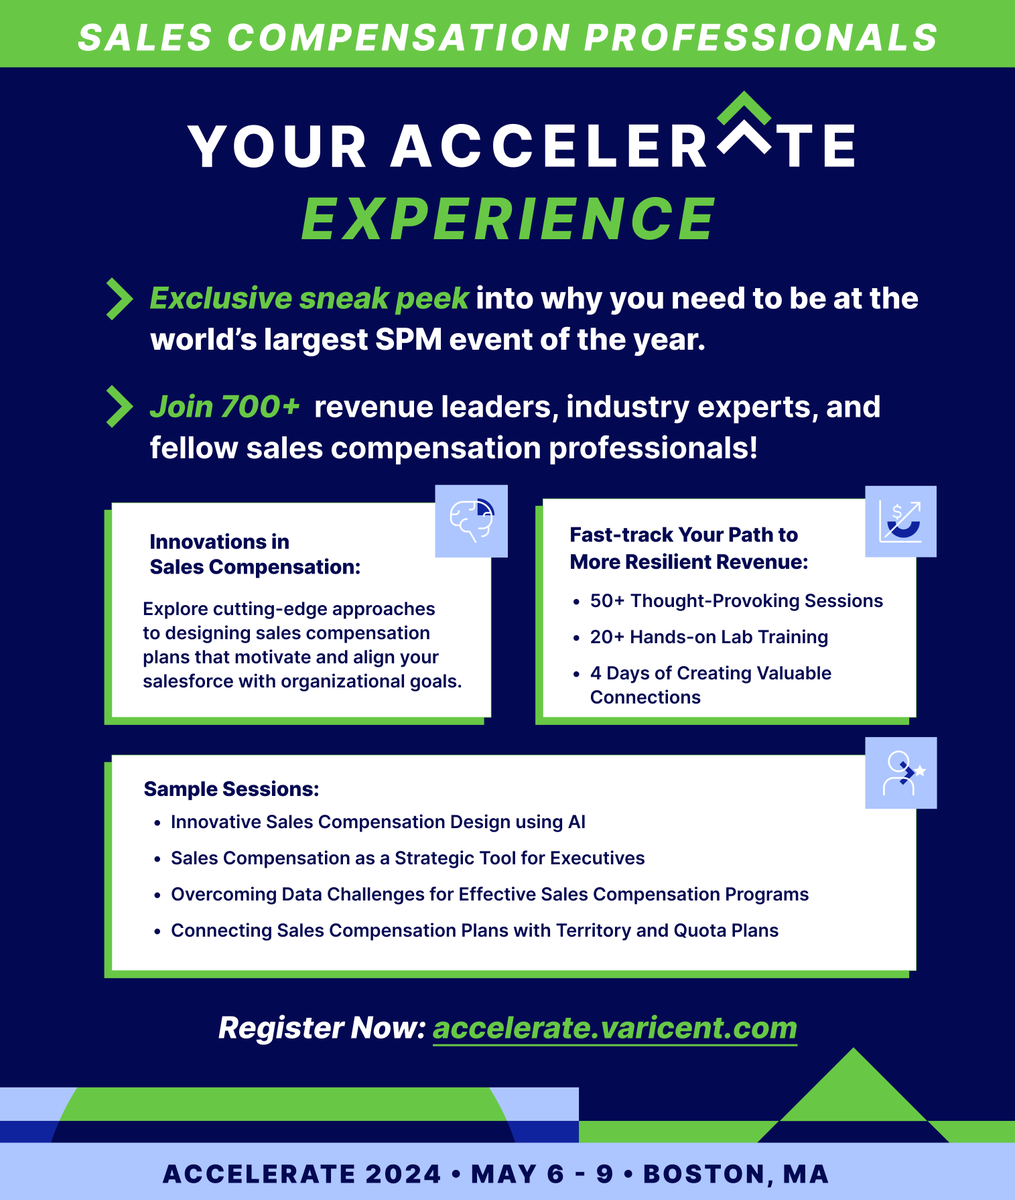 Calling all #salescomp professionals, focus on driving resilient growth, and ensuring your incentives align with your go-to-market strategy at Accelerate! 

Join us for 4 days of immersive training, unlike anything you have experienced. 🚀

Save your seat
bit.ly/3uGXjvj